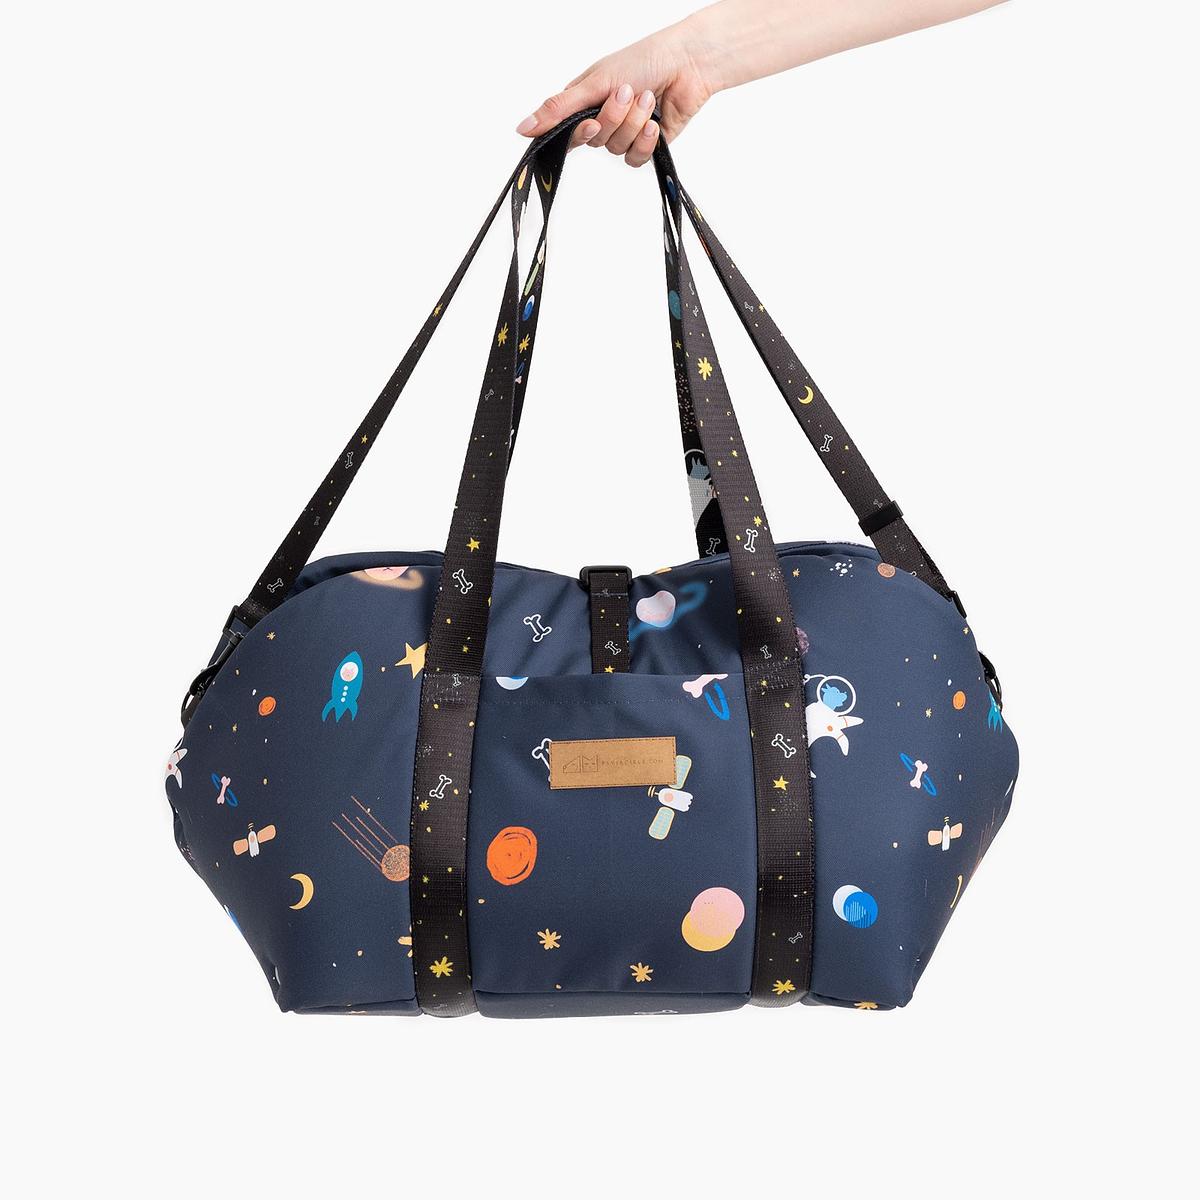 Bag 3in1 "I need space"